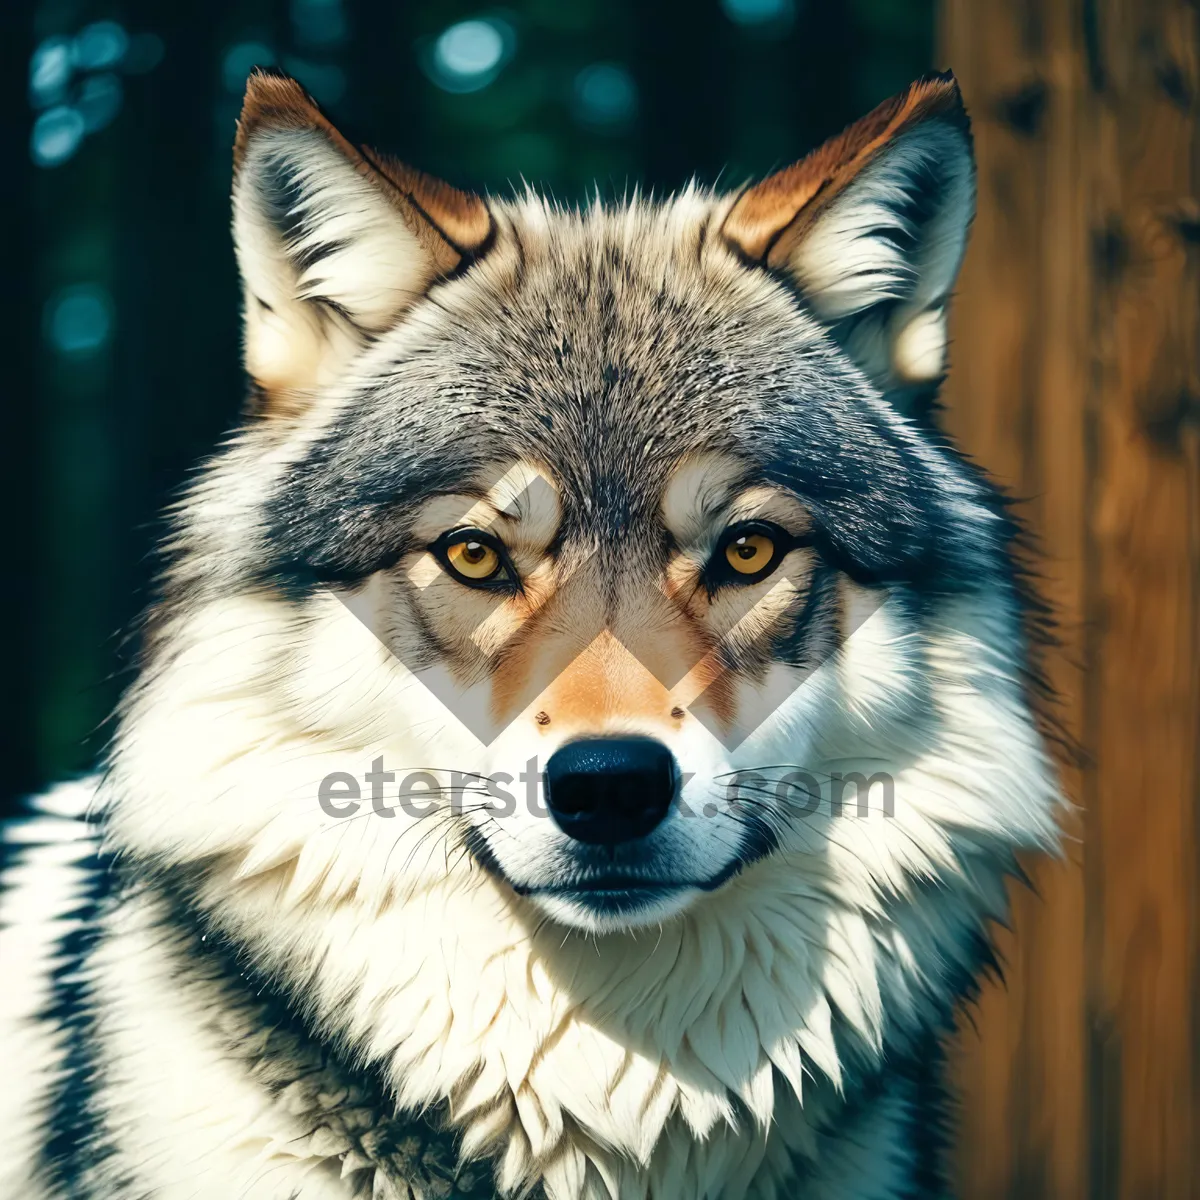 Picture of Furry Malamute's Fiery Gaze: Majestic Canine in Captivating Portrait